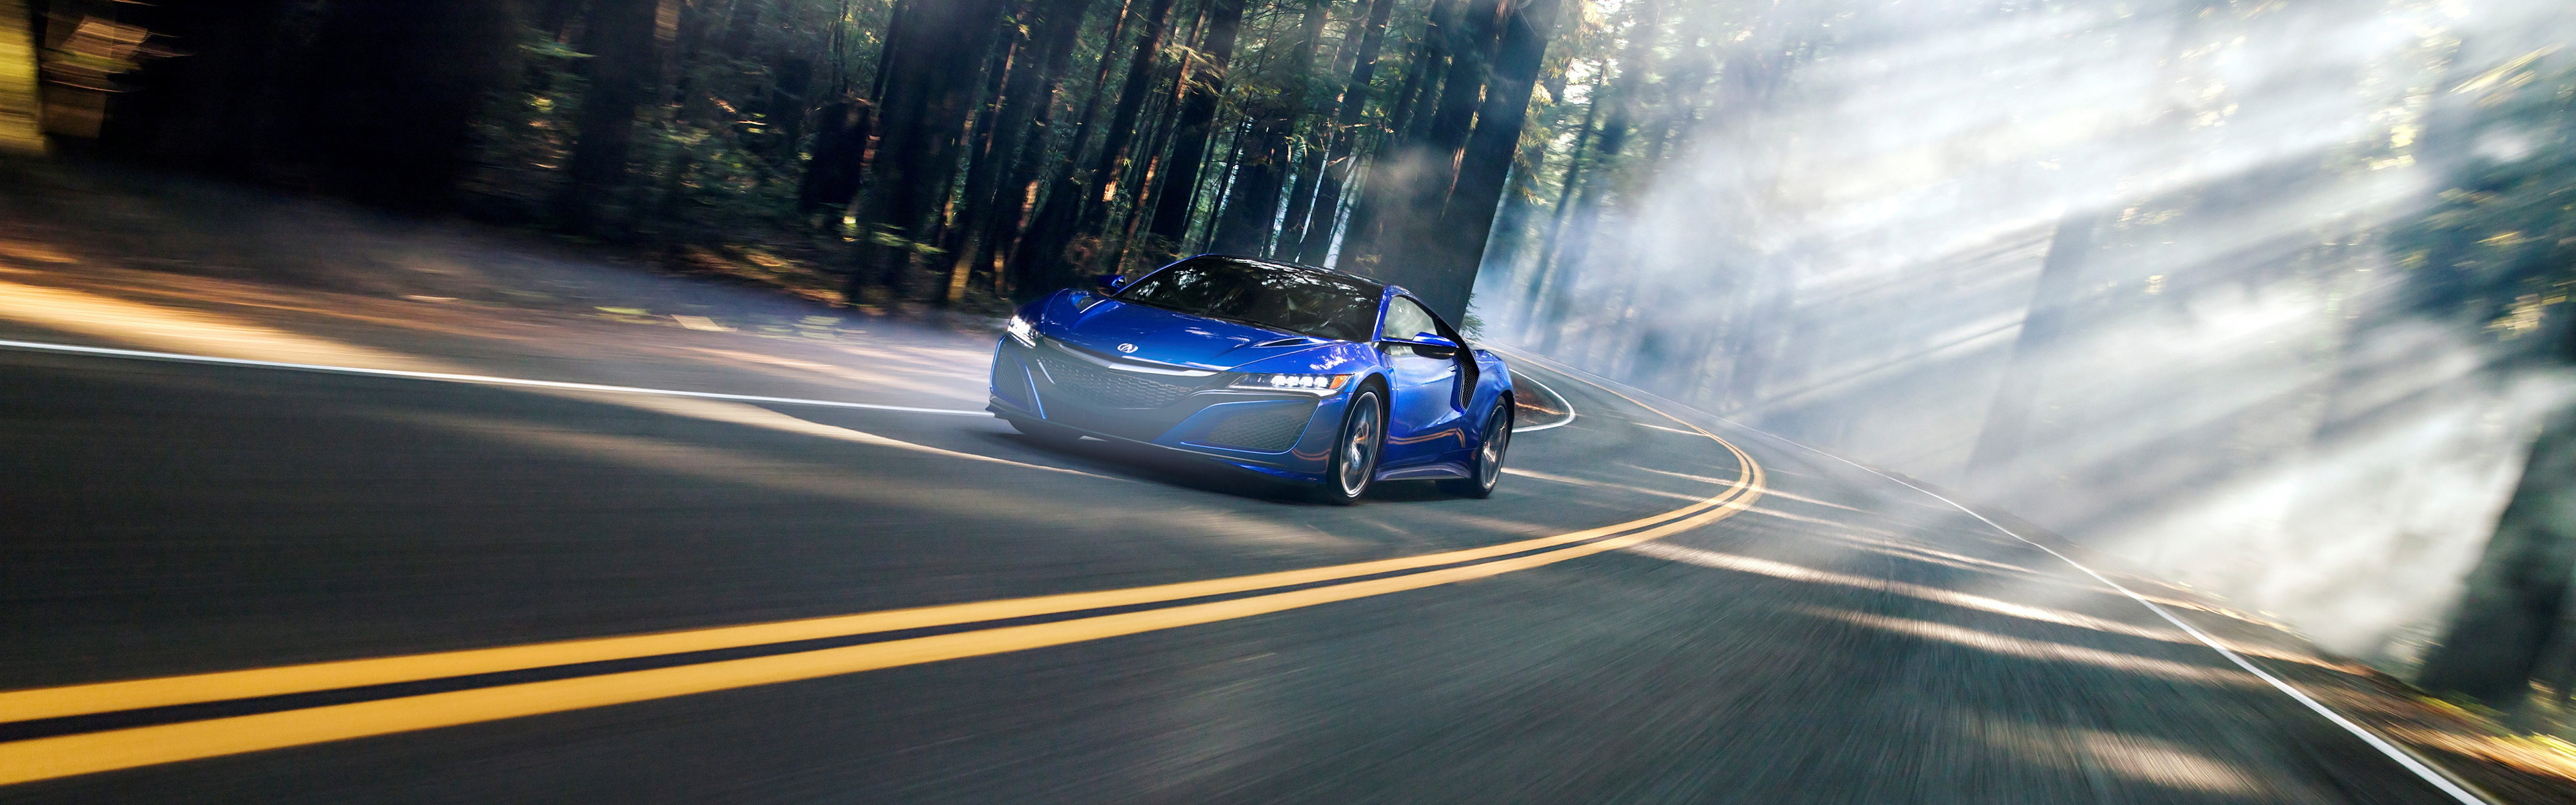 Acura NSX, Road, Motion Blur, Car, Vehicle, Forest, Dual Monitors, Mist, Multiple Display Wallpaper